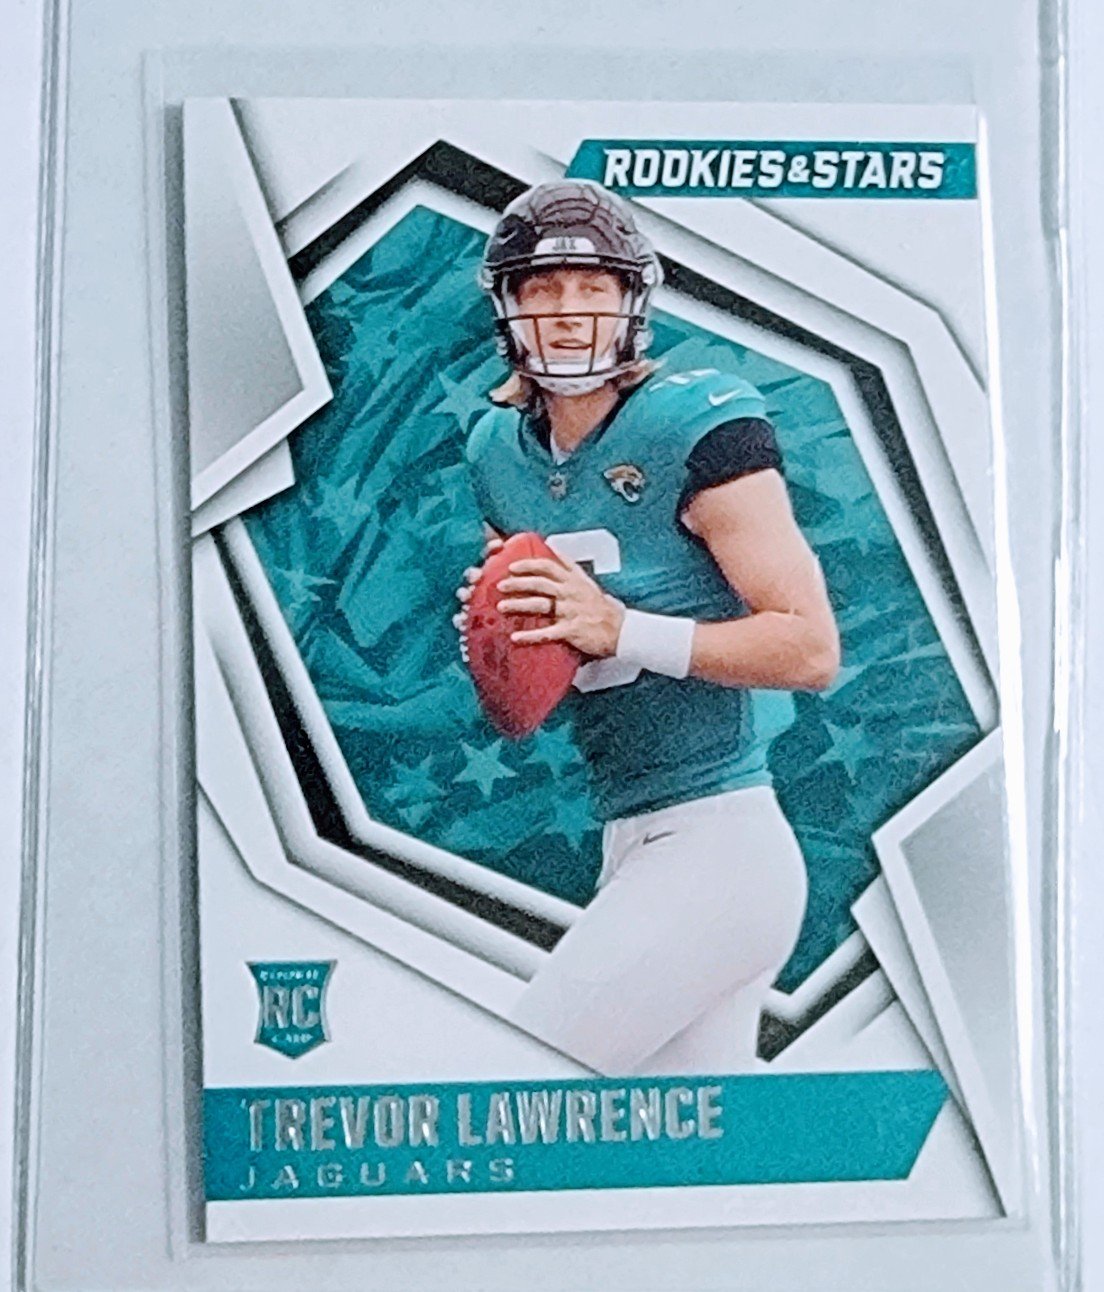 2021 Panini Rookies and Stars Trevor Lawrence Rookie Football Card AVM1 simple Xclusive Collectibles   